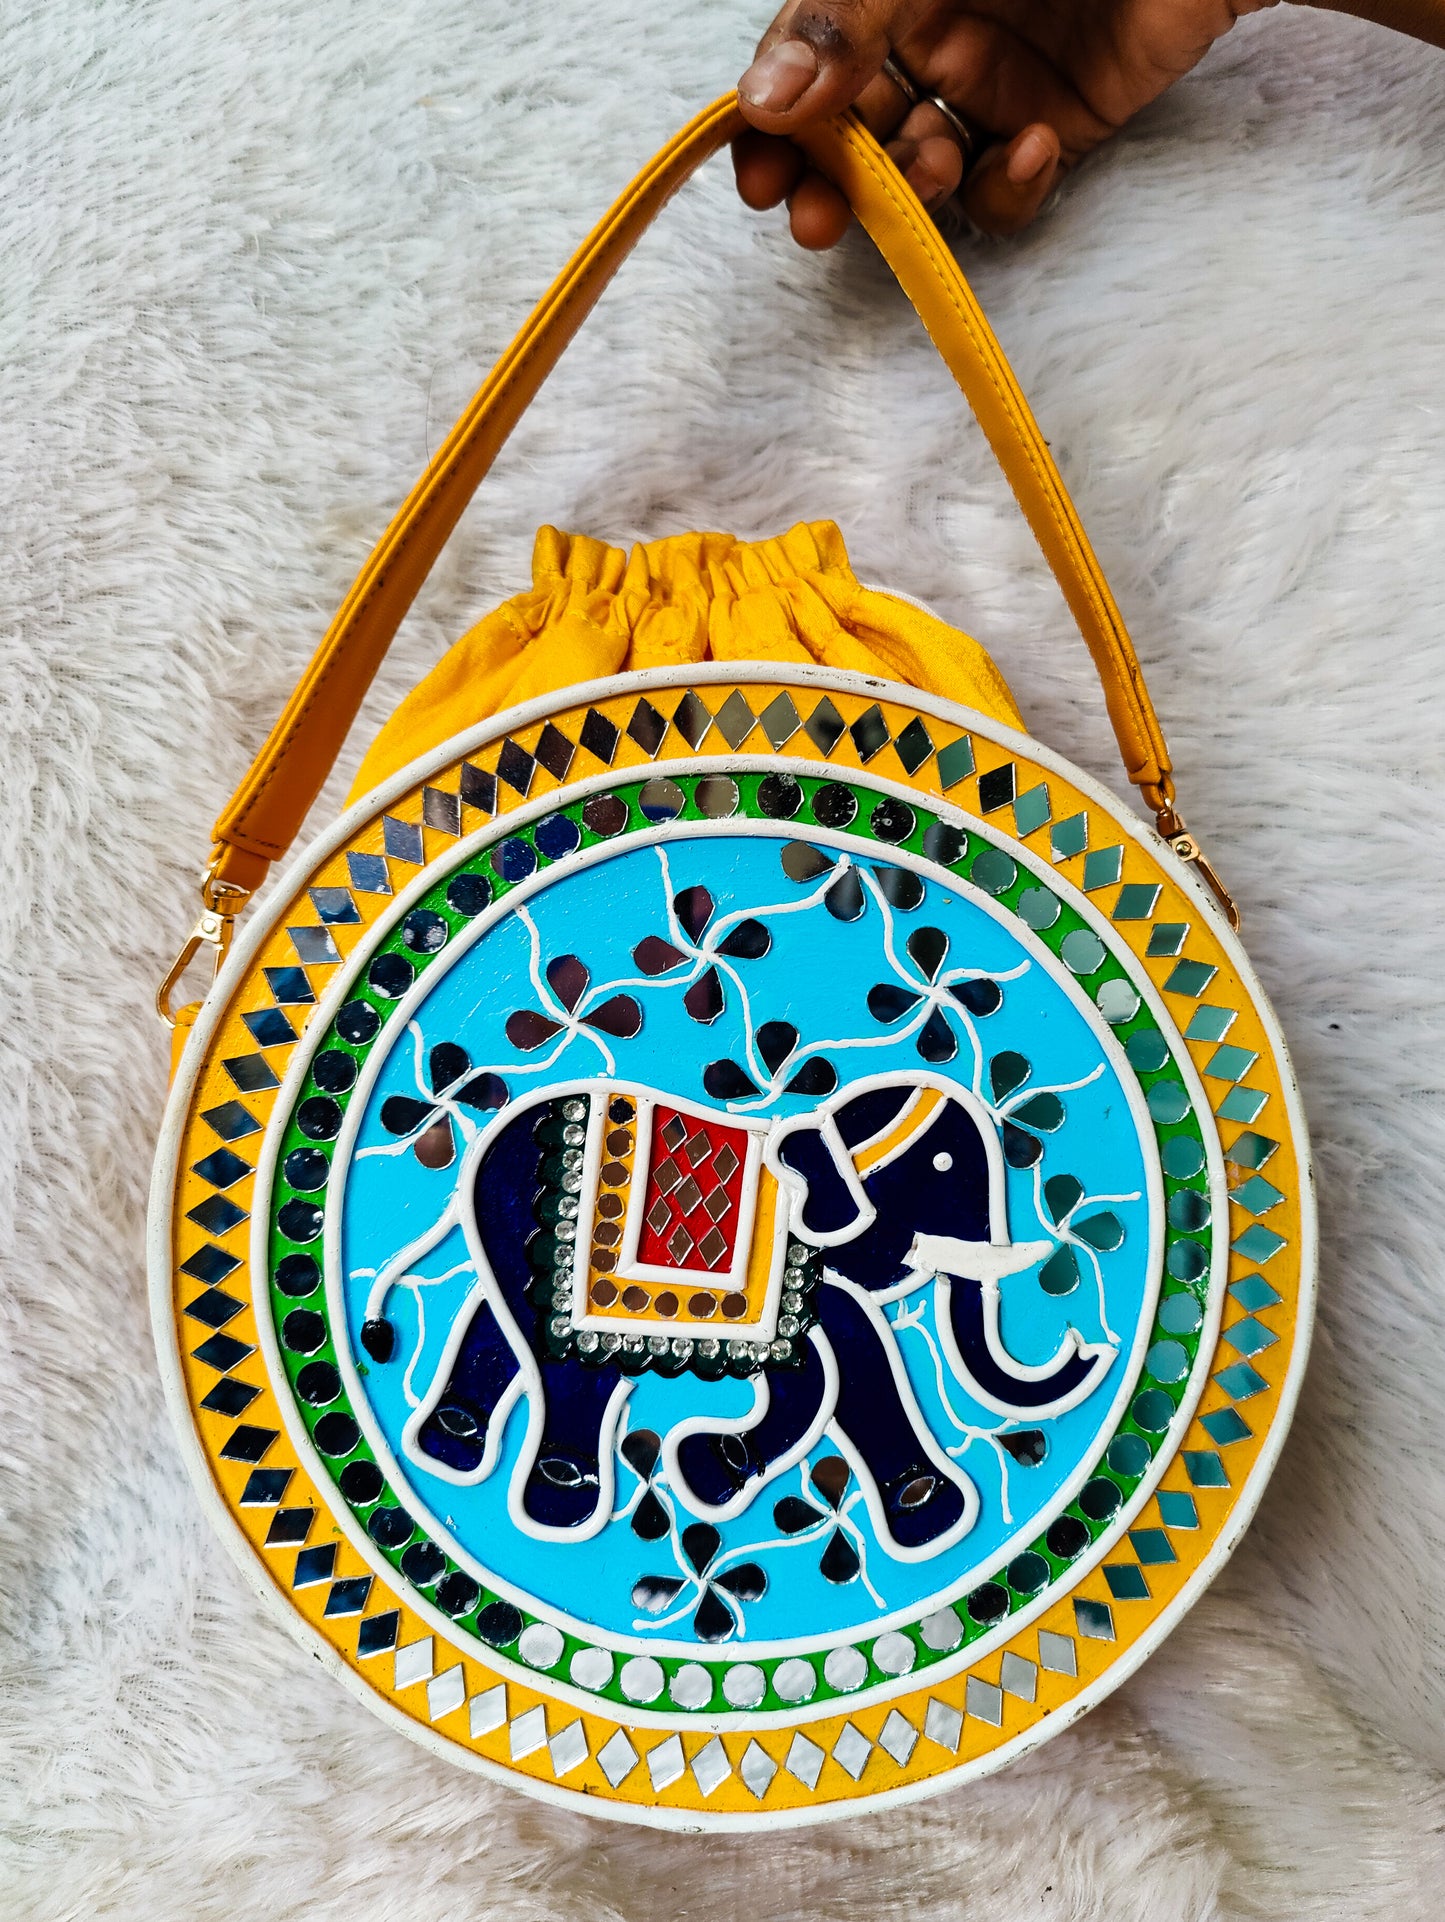 Indie Elephant Lippan Art Handcrafted Potli Bag with Sling